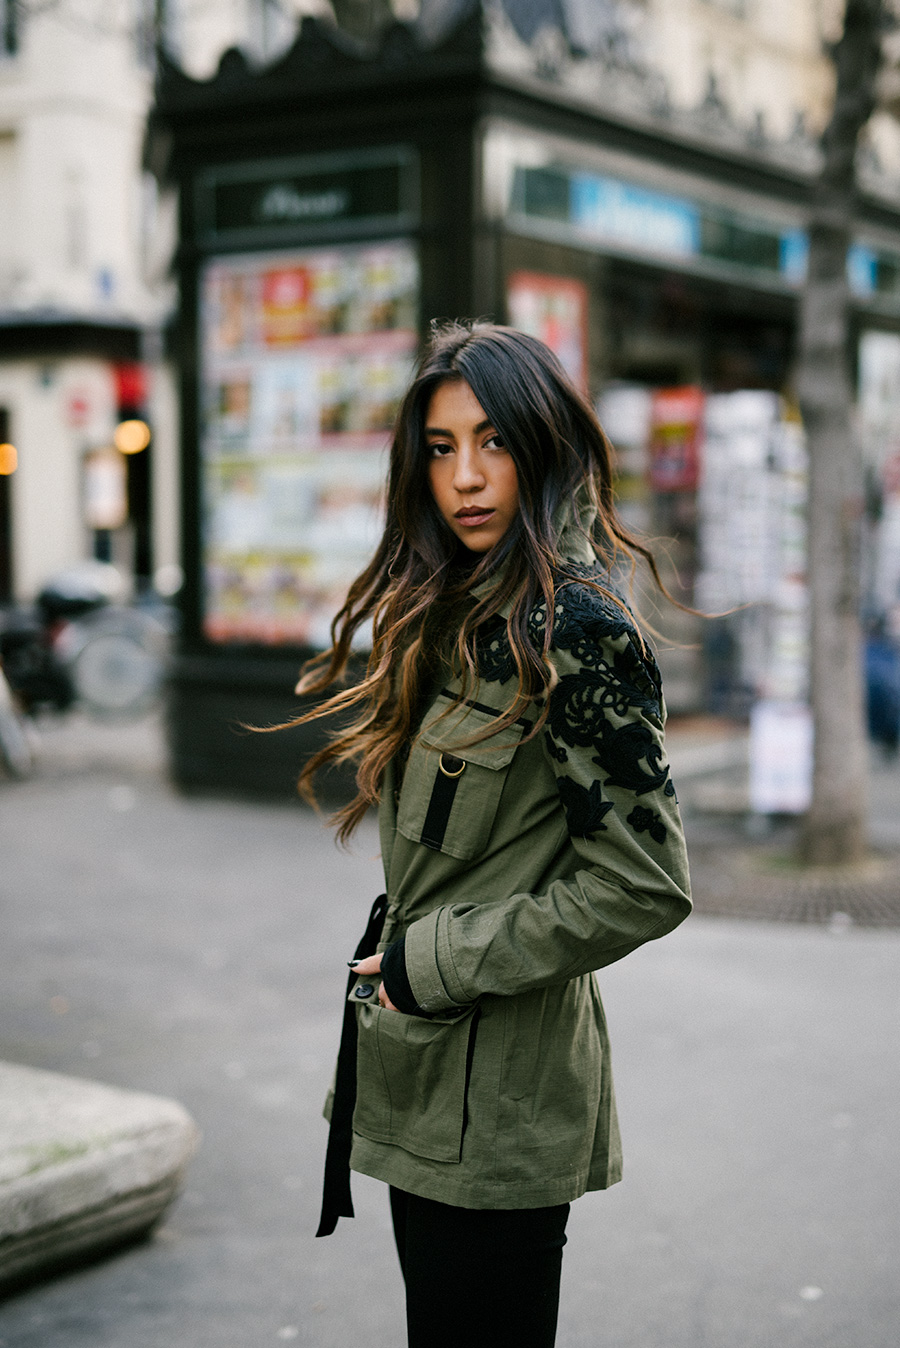 Veronica Beard Heritage Utility Jacket paris fashion week stella mccartney bag magazine stand paris streets not your standard kayla seah blogger fashion outfit streetstyle black flares outfit ideas france travel blog